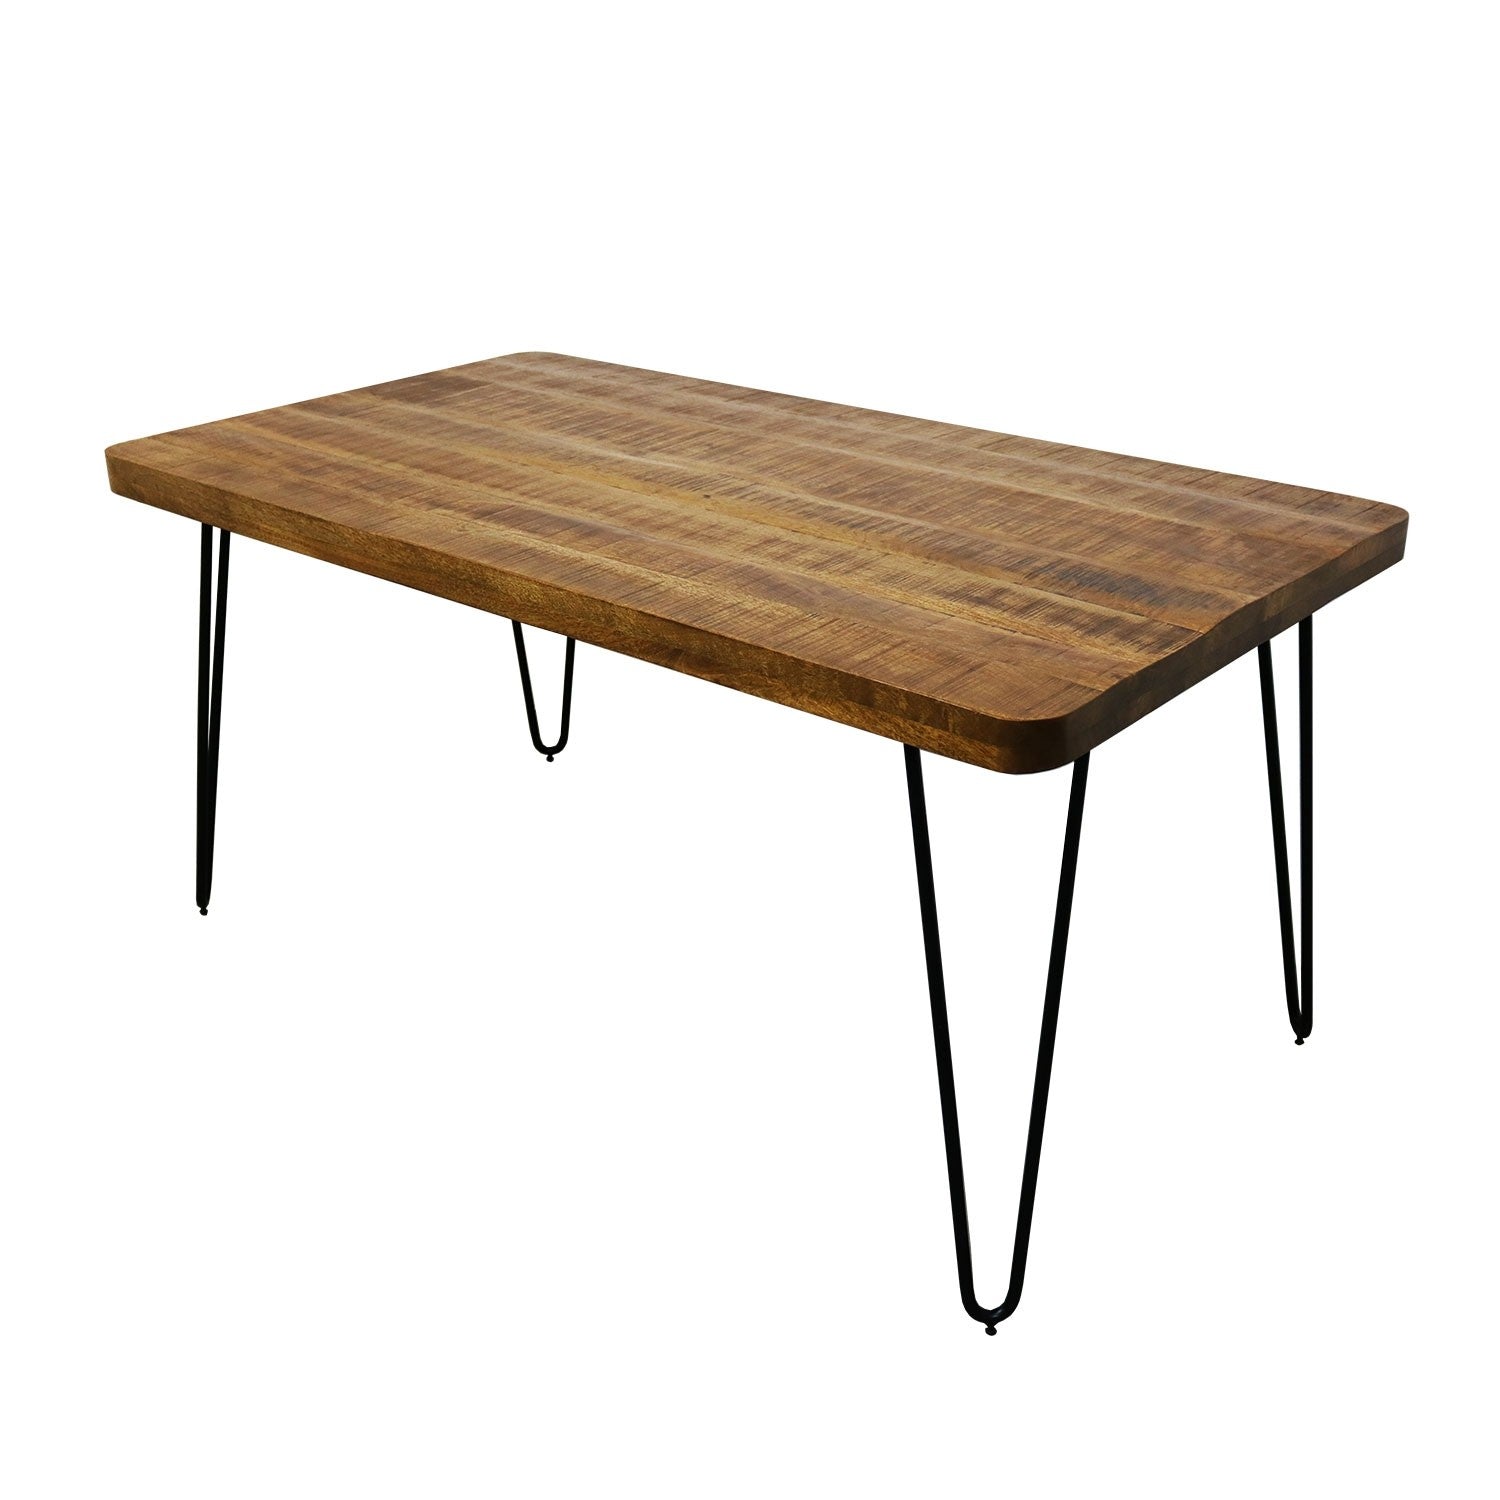 Kick dining table Triangle - 160cm